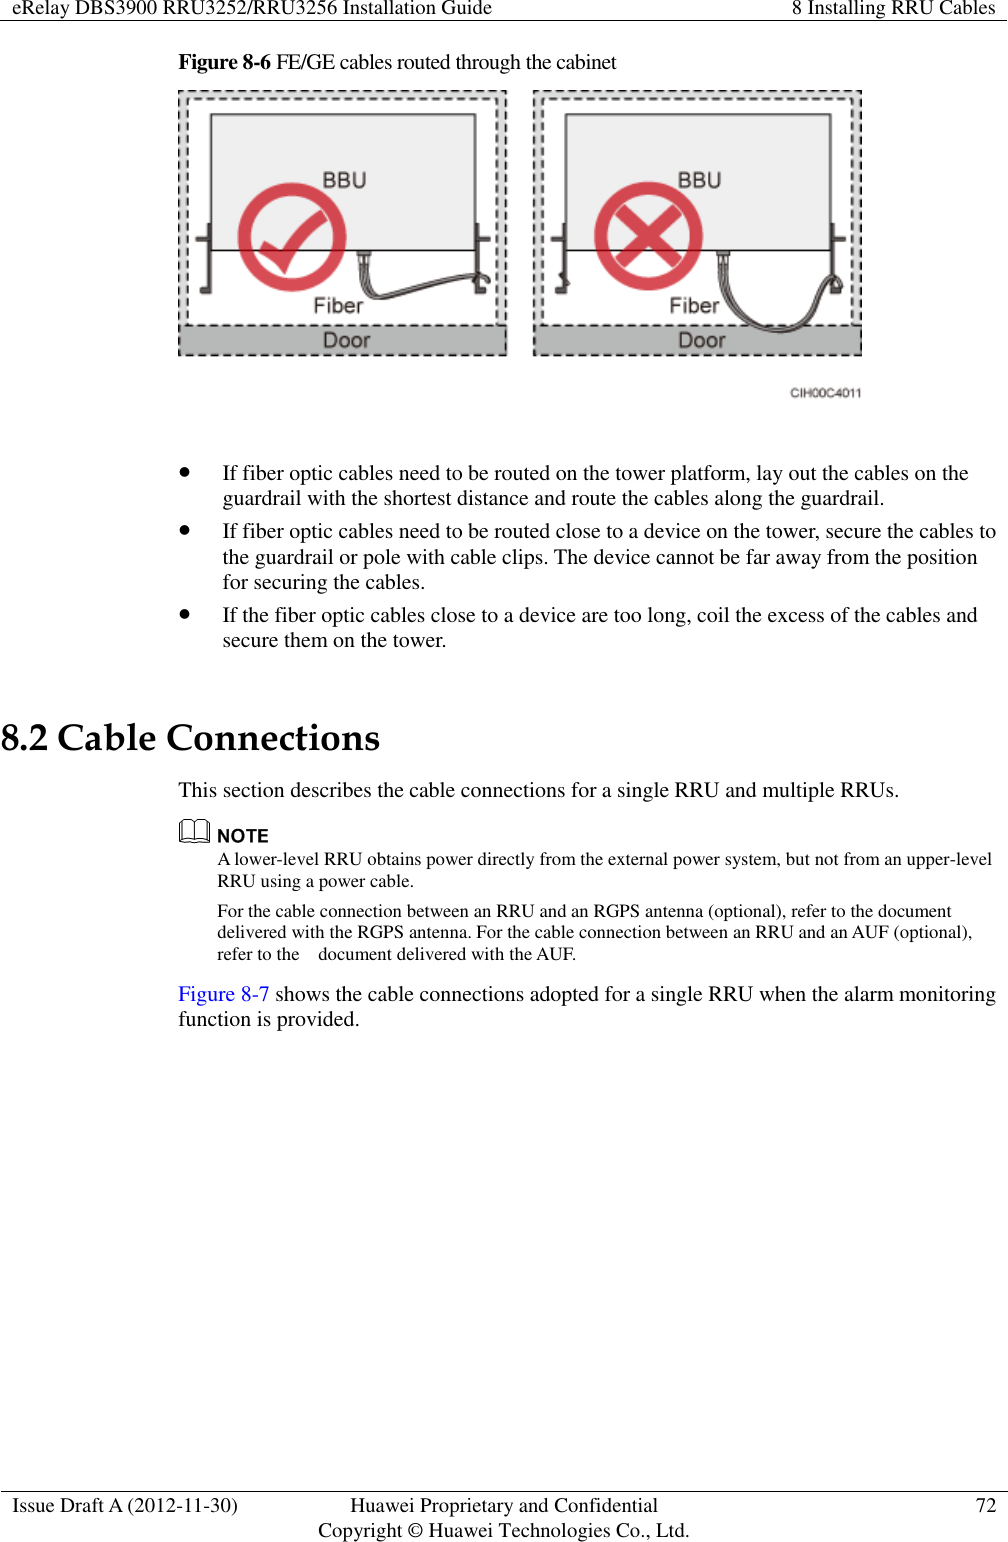 eRelay DBS3900 RRU3252/RRU3256 Installation Guide 8 Installing RRU Cables  Issue Draft A (2012-11-30) Huawei Proprietary and Confidential                                     Copyright © Huawei Technologies Co., Ltd. 72  Figure 8-6 FE/GE cables routed through the cabinet    If fiber optic cables need to be routed on the tower platform, lay out the cables on the guardrail with the shortest distance and route the cables along the guardrail.  If fiber optic cables need to be routed close to a device on the tower, secure the cables to the guardrail or pole with cable clips. The device cannot be far away from the position for securing the cables.  If the fiber optic cables close to a device are too long, coil the excess of the cables and secure them on the tower. 8.2 Cable Connections This section describes the cable connections for a single RRU and multiple RRUs.  A lower-level RRU obtains power directly from the external power system, but not from an upper-level RRU using a power cable. For the cable connection between an RRU and an RGPS antenna (optional), refer to the document delivered with the RGPS antenna. For the cable connection between an RRU and an AUF (optional), refer to the    document delivered with the AUF. Figure 8-7 shows the cable connections adopted for a single RRU when the alarm monitoring function is provided. 